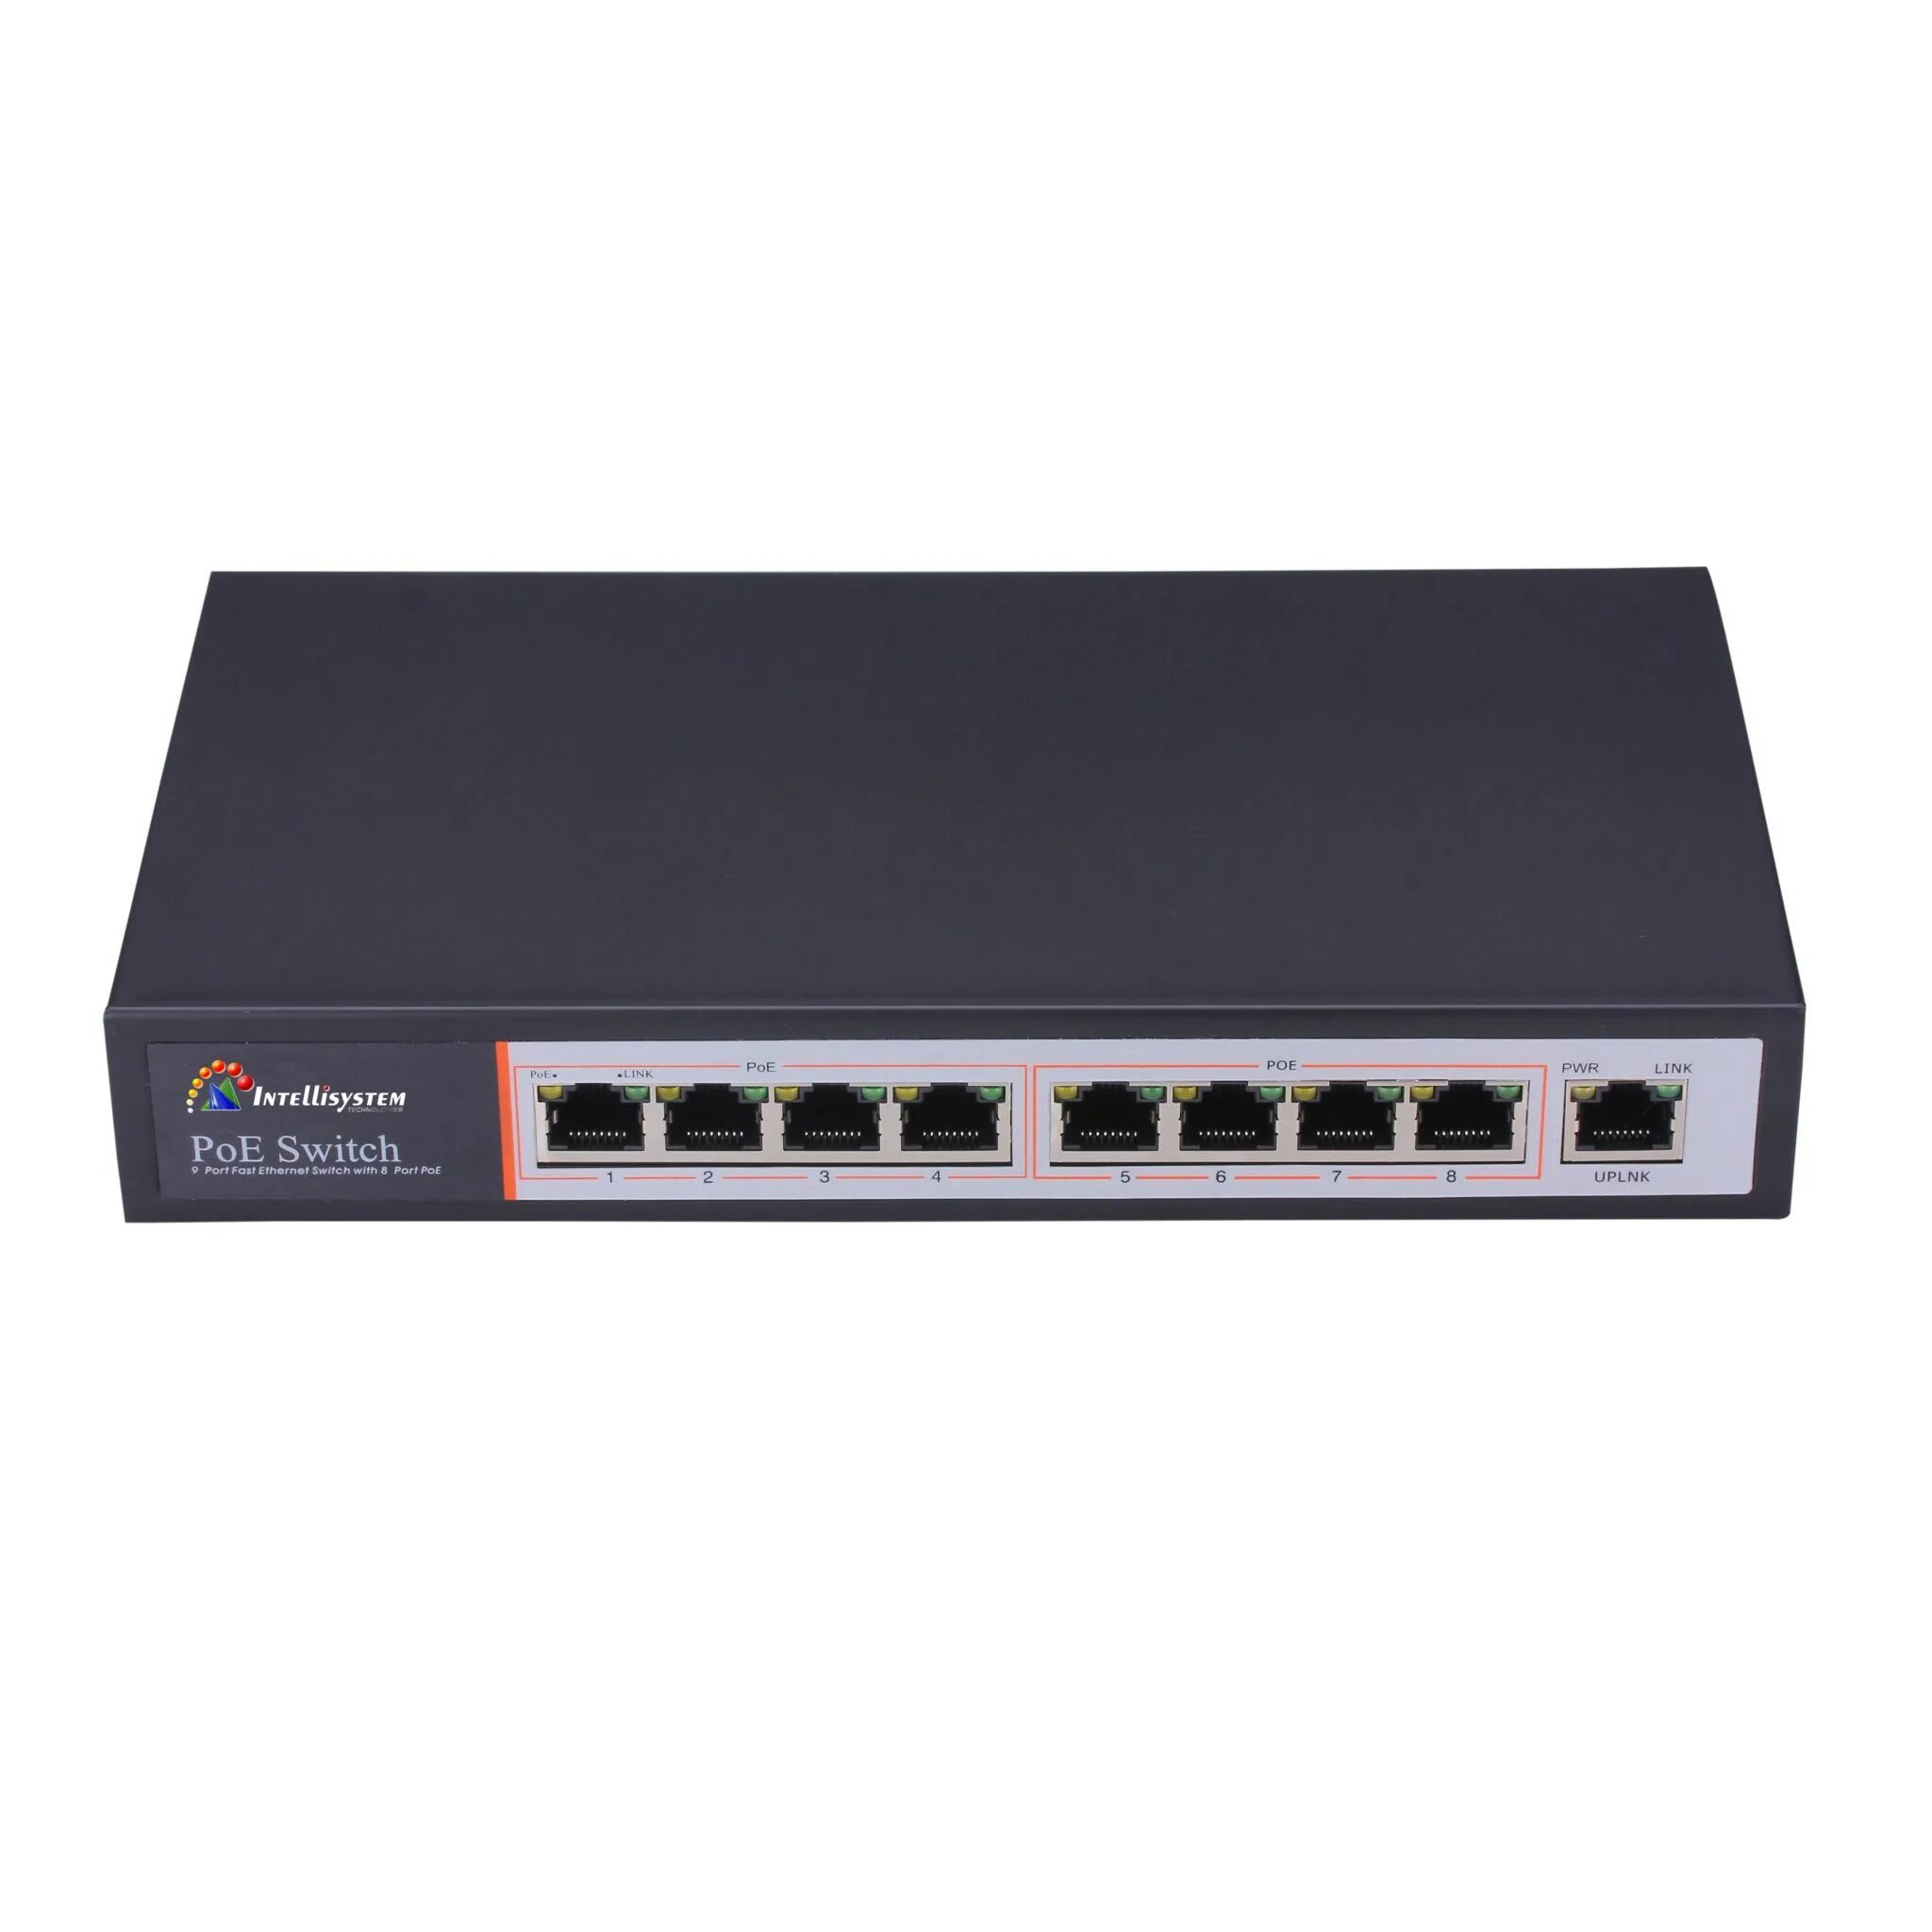 POE Switch IEEE802.3af. 1 POE порт IEEE 802.3af. Сетевой концентратор "Ethernet Switch" 8-Port 10/100 м. 8ch POE Switch.